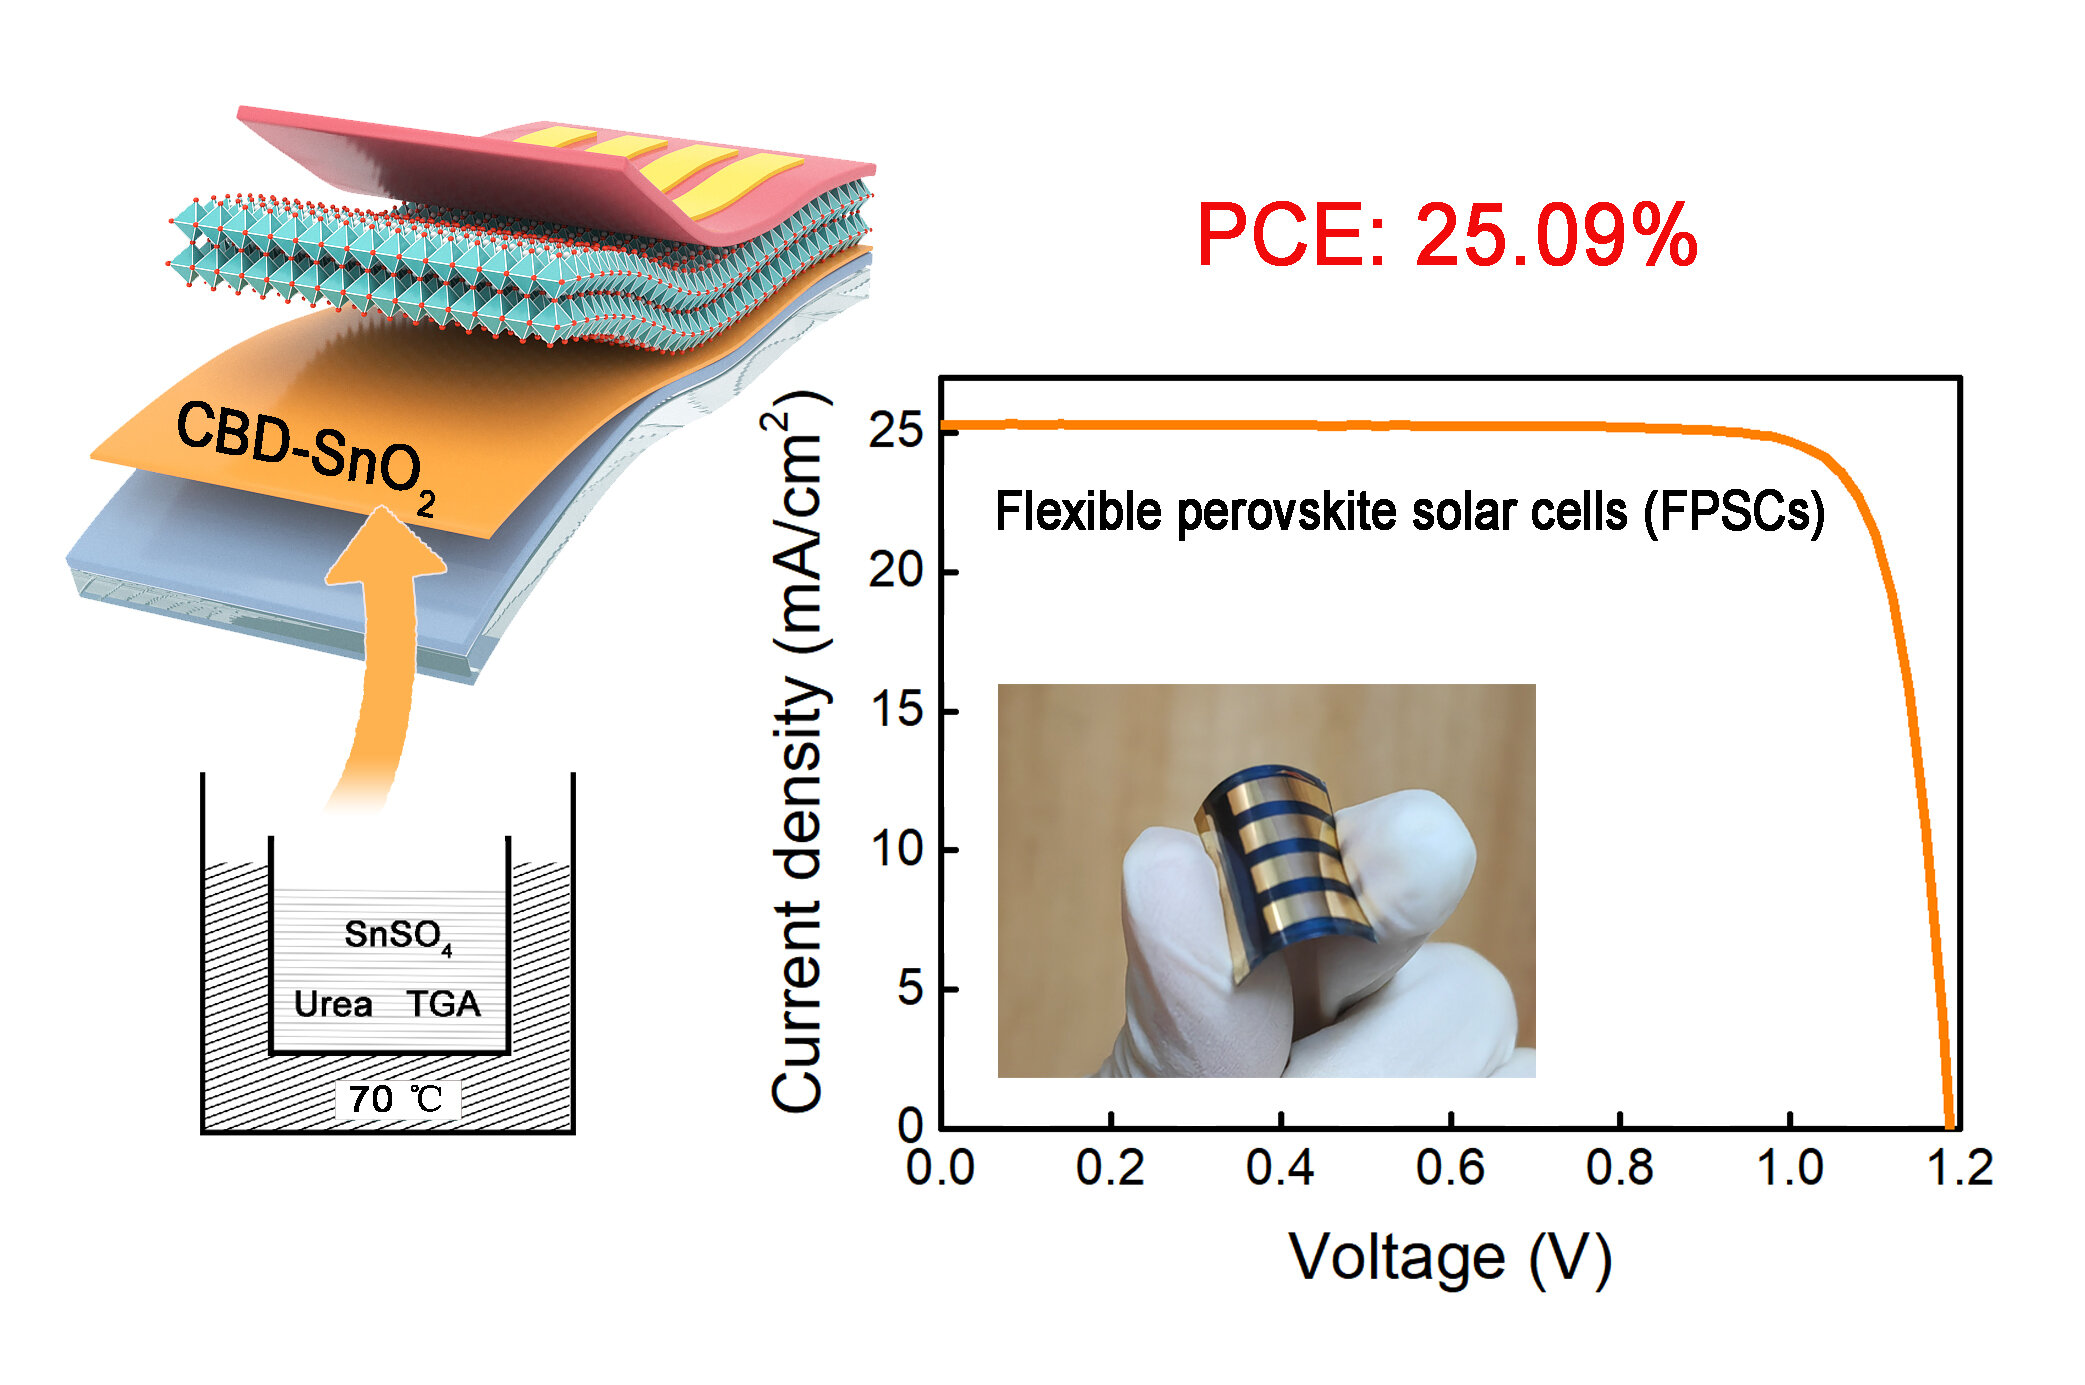 #Highest power efficiency achieved in flexible solar cells using new fabrication technique